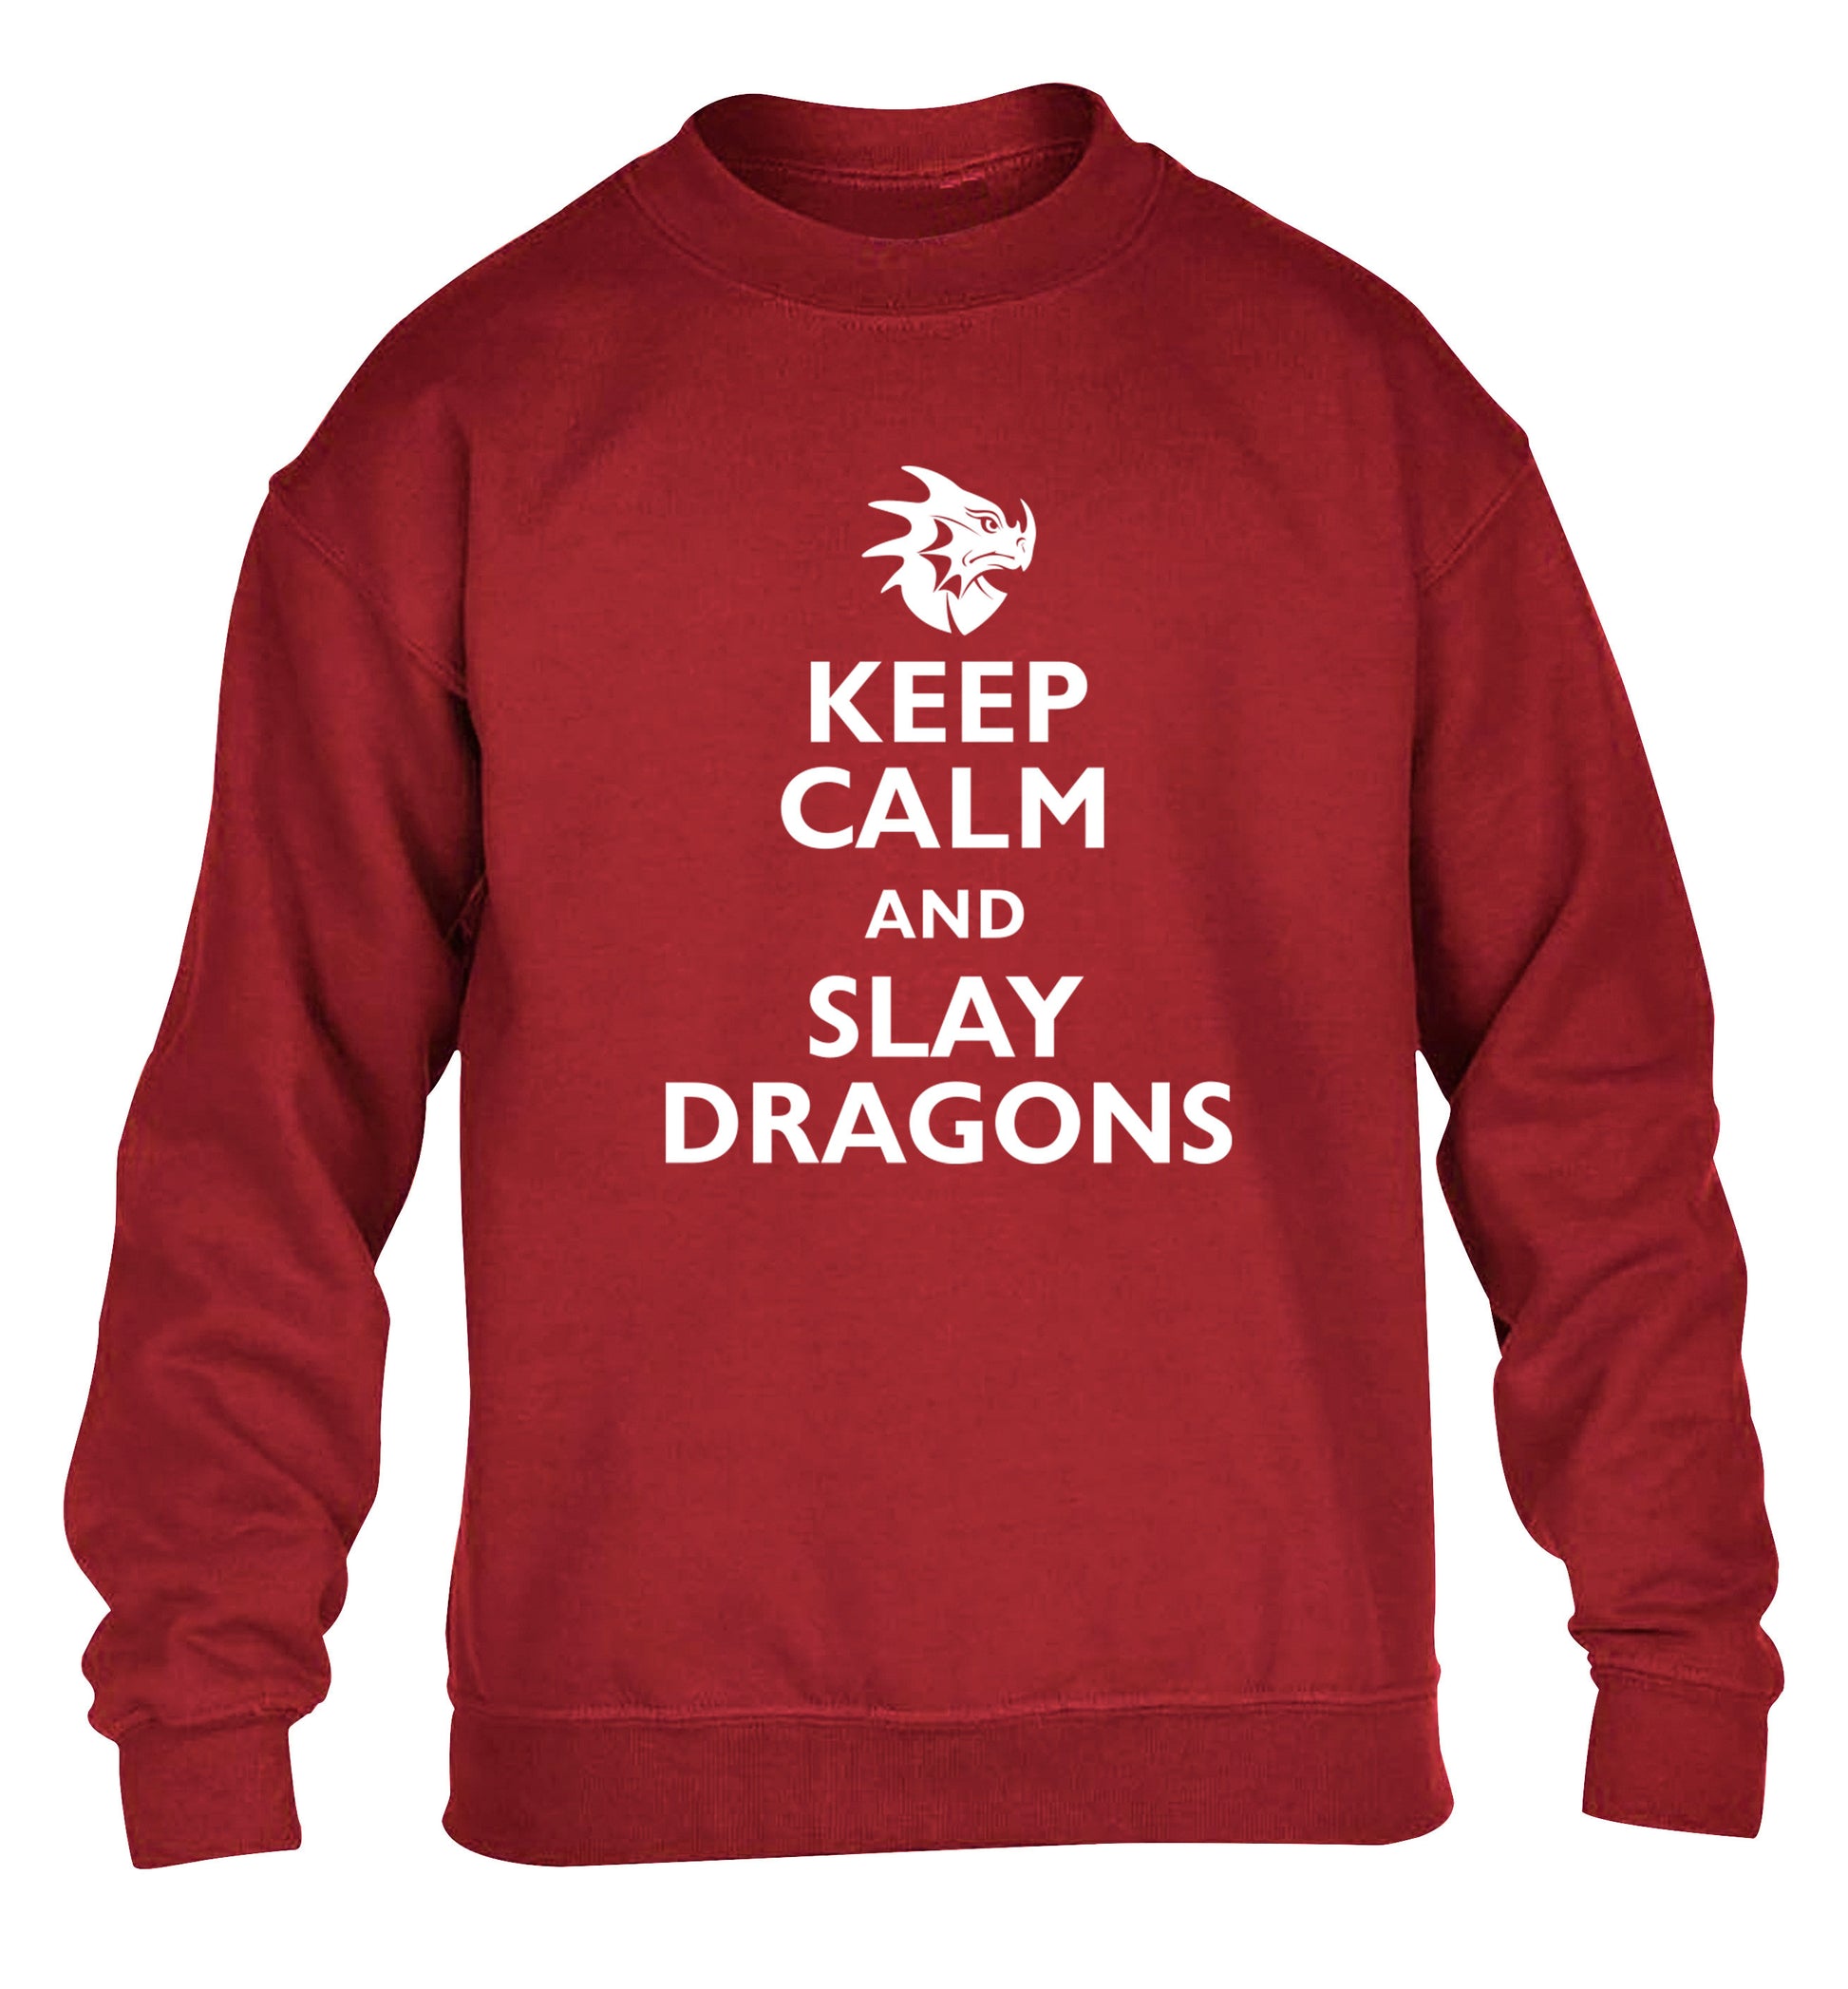 Keep calm and slay dragons children's grey sweater 12-14 Years